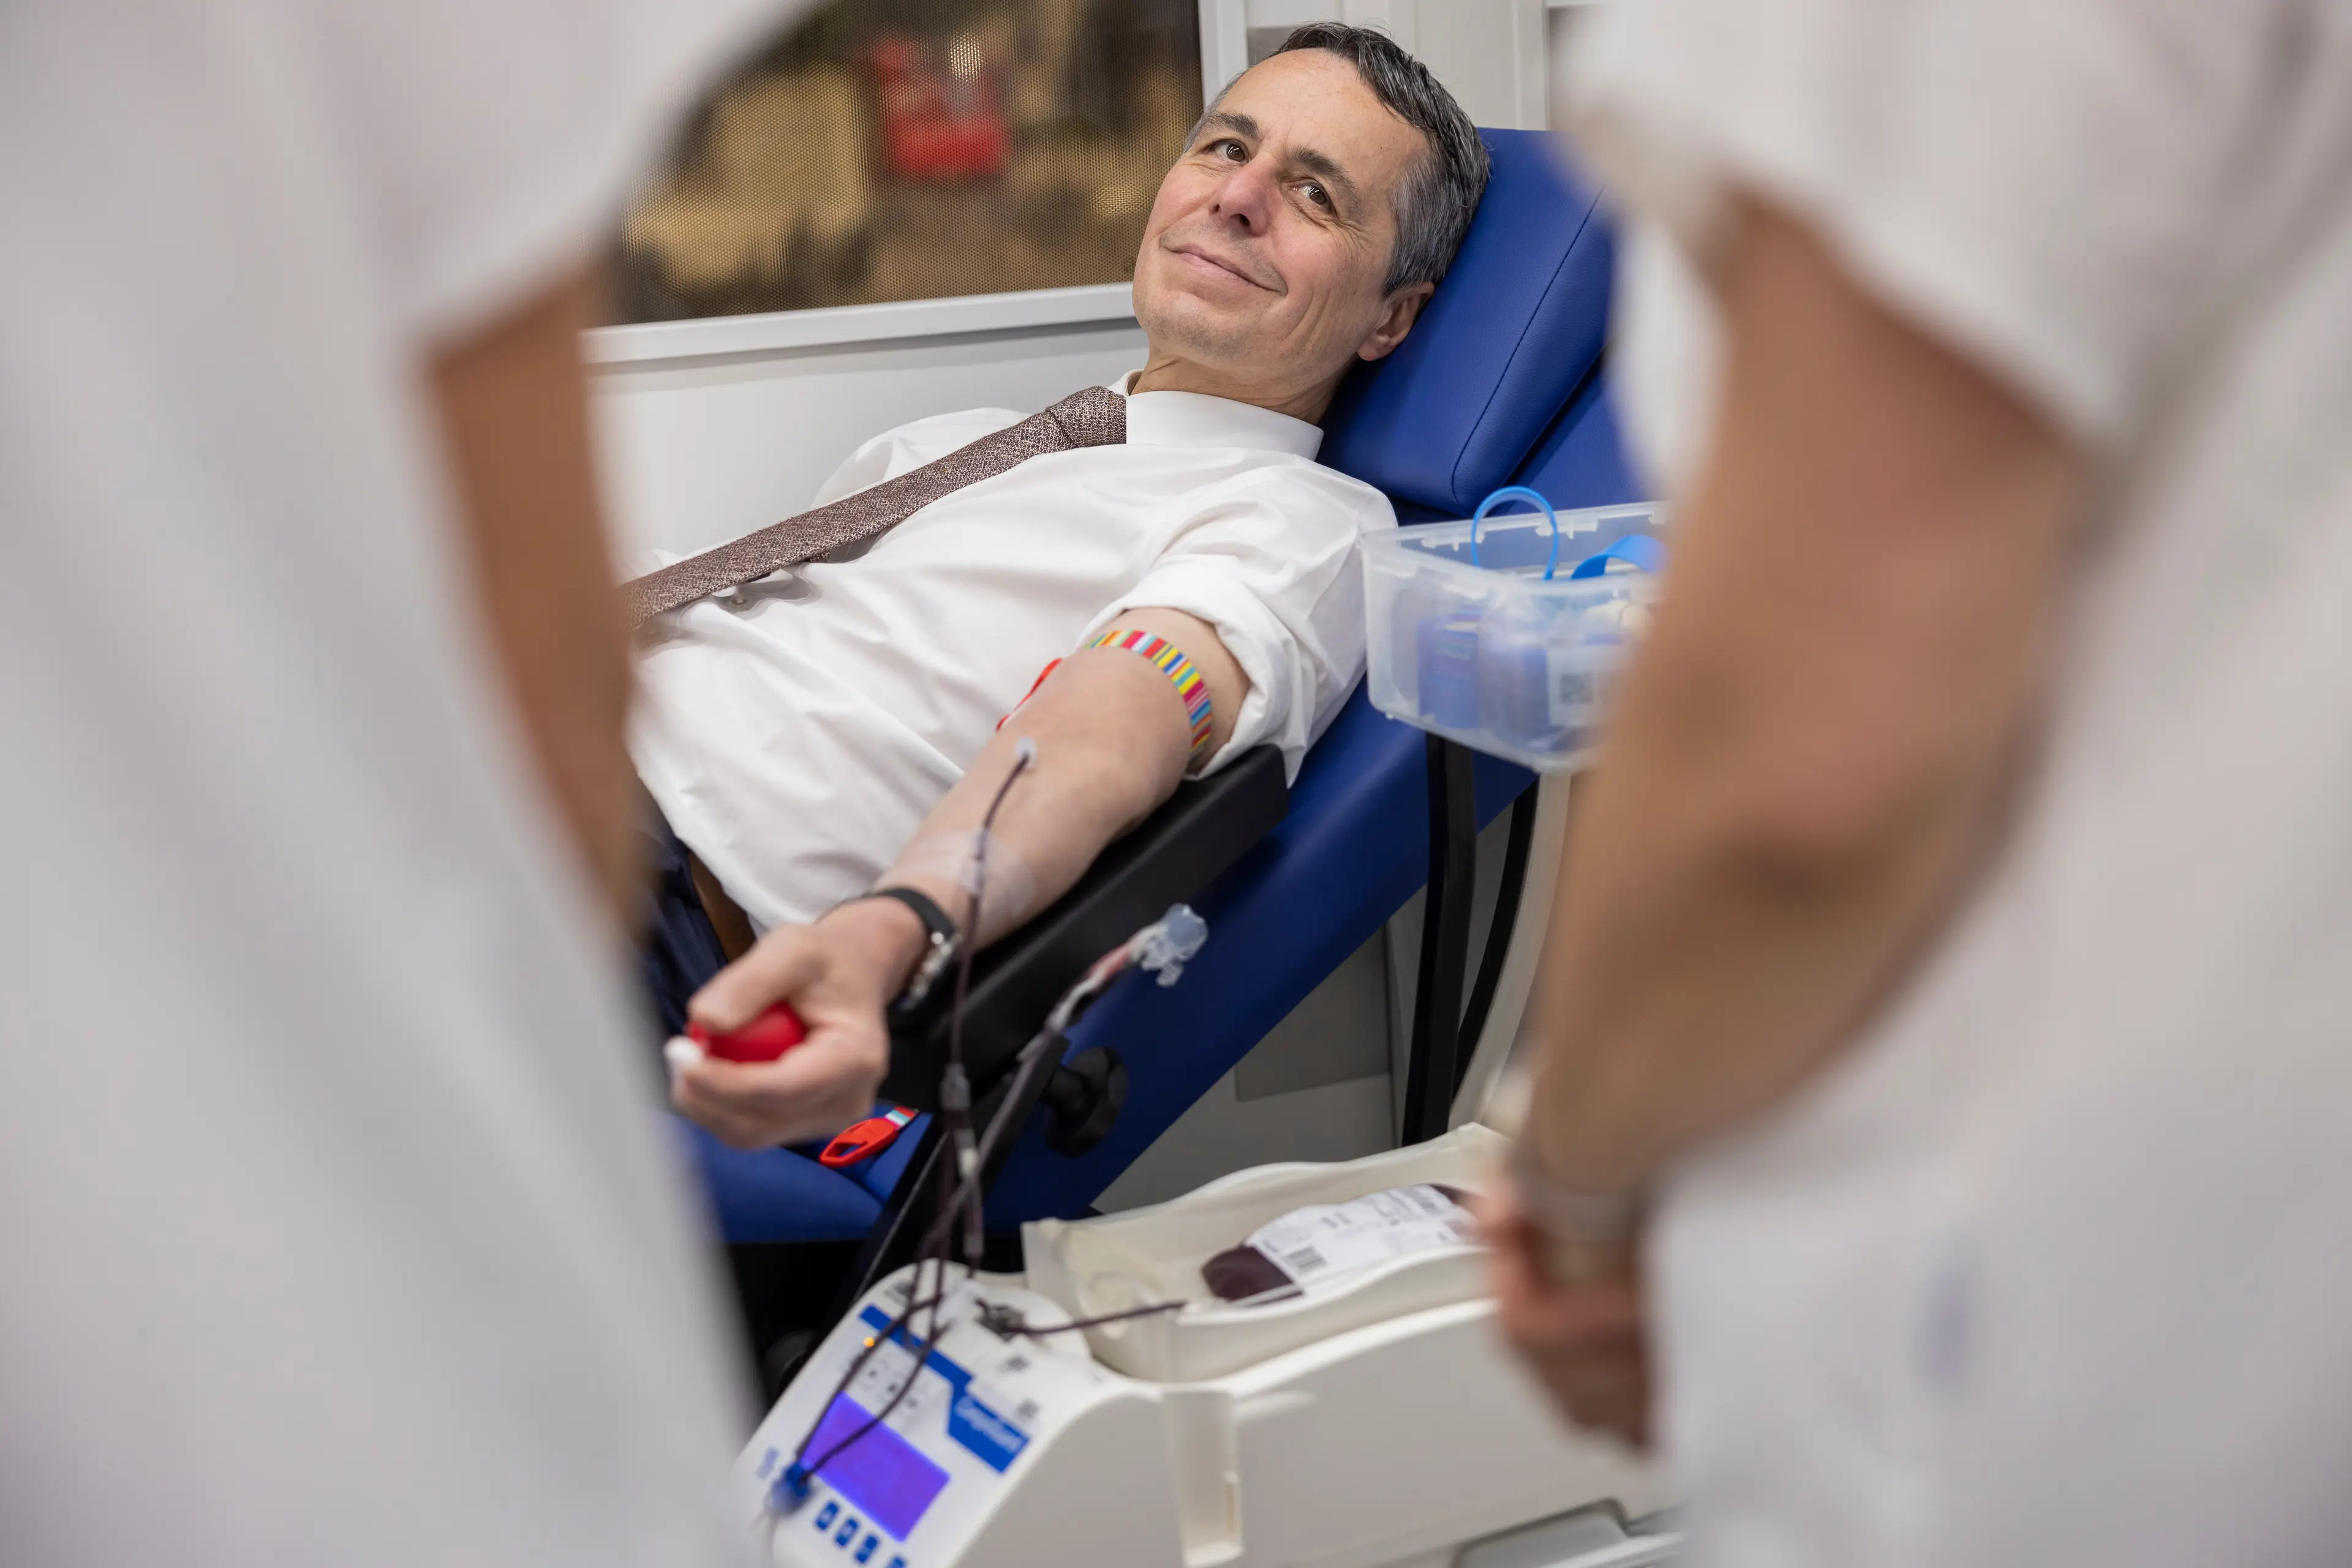 Federal Councillor Ignazio Cassis donating blood, lying in a recliner.